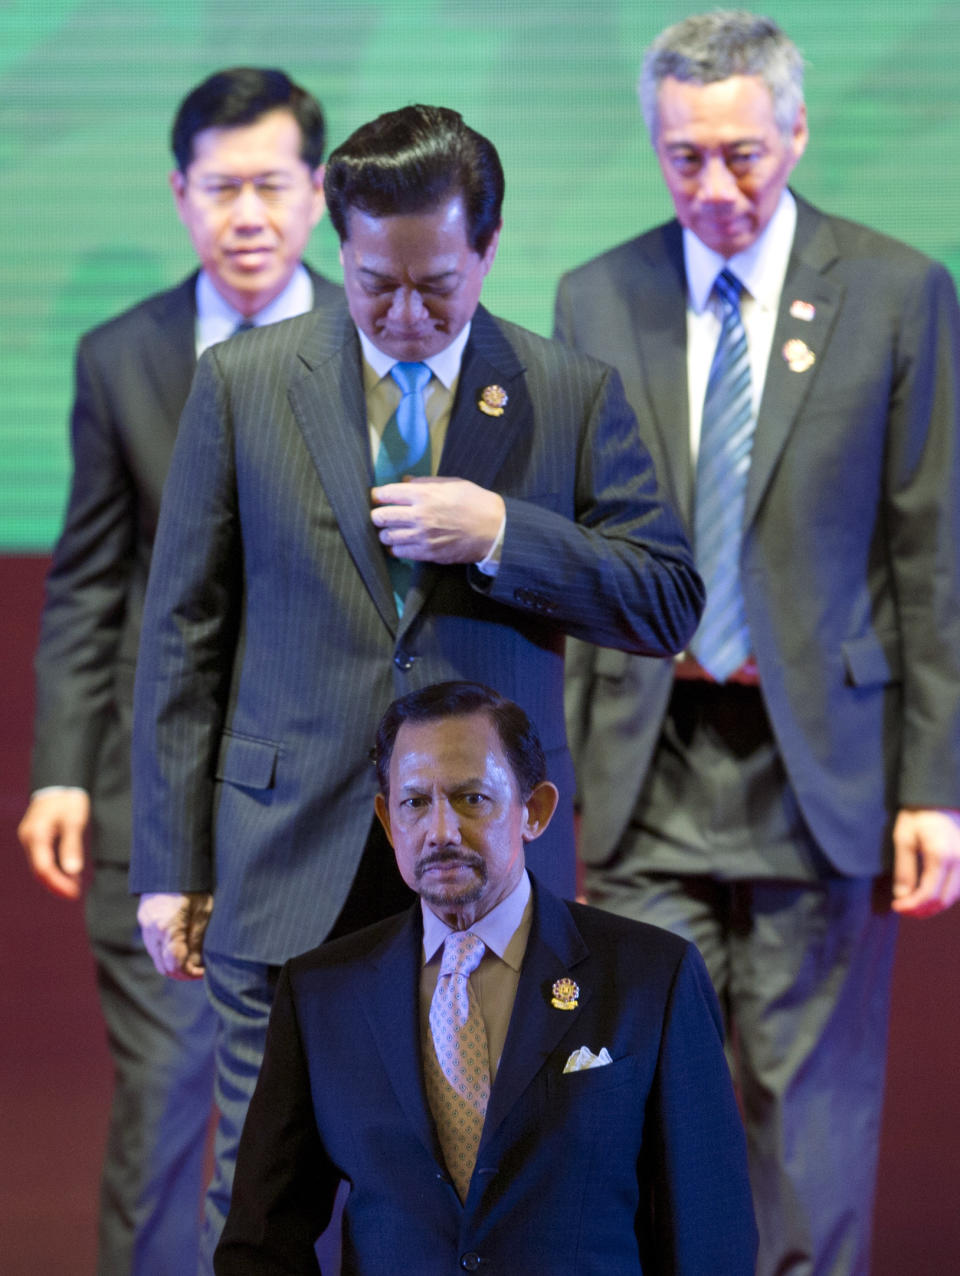 Sultan of Brunei Hassanal Bolkiah, foreground, walks away with a group of leaders of the Association of Southeast Asian Nations after posing for a photograph during the 24th ASEAN leaders Summit in Naypyitaw, Myanmar, Sunday, May 11, 2014.(AP Photo/Gemunu Amarasinghe)